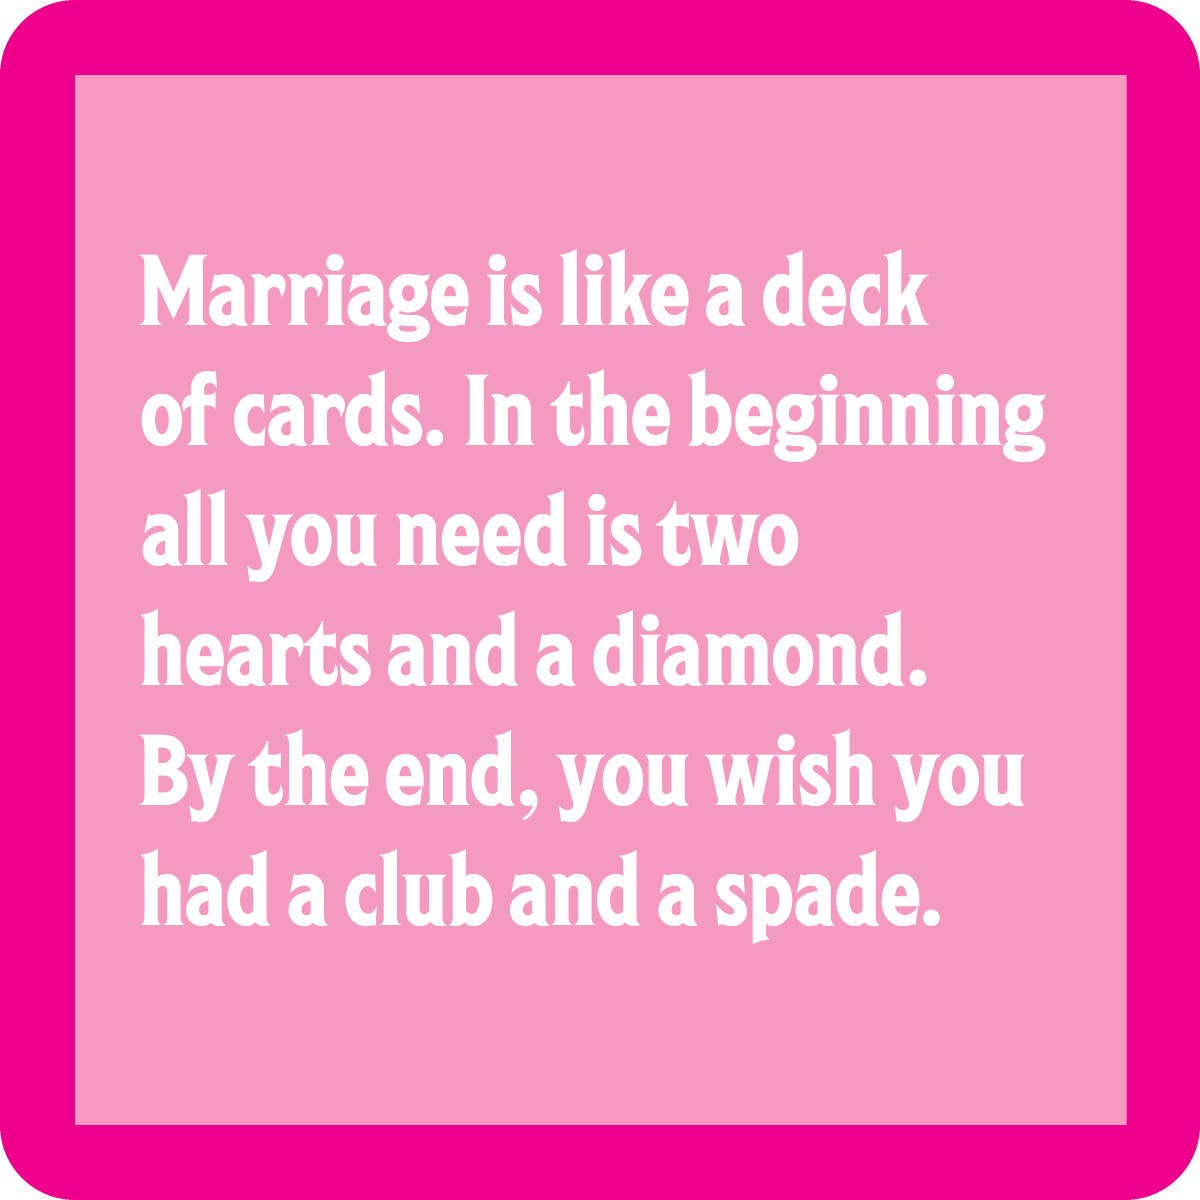 Drinks on Me Coasters Marriage like a deck of cards coaster